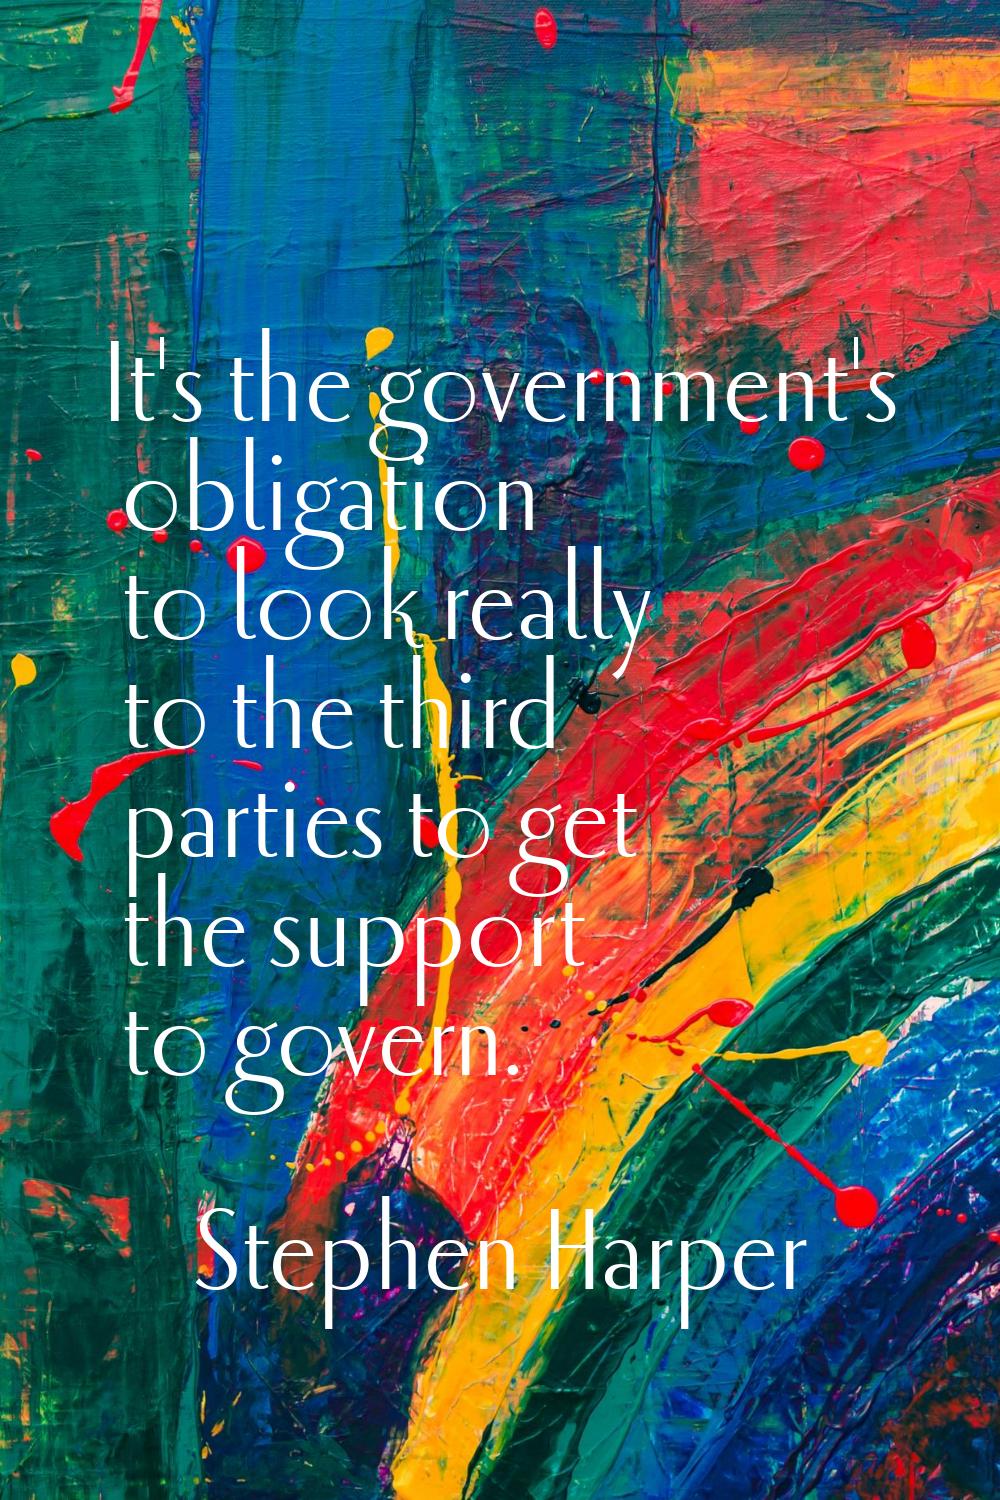 It's the government's obligation to look really to the third parties to get the support to govern.